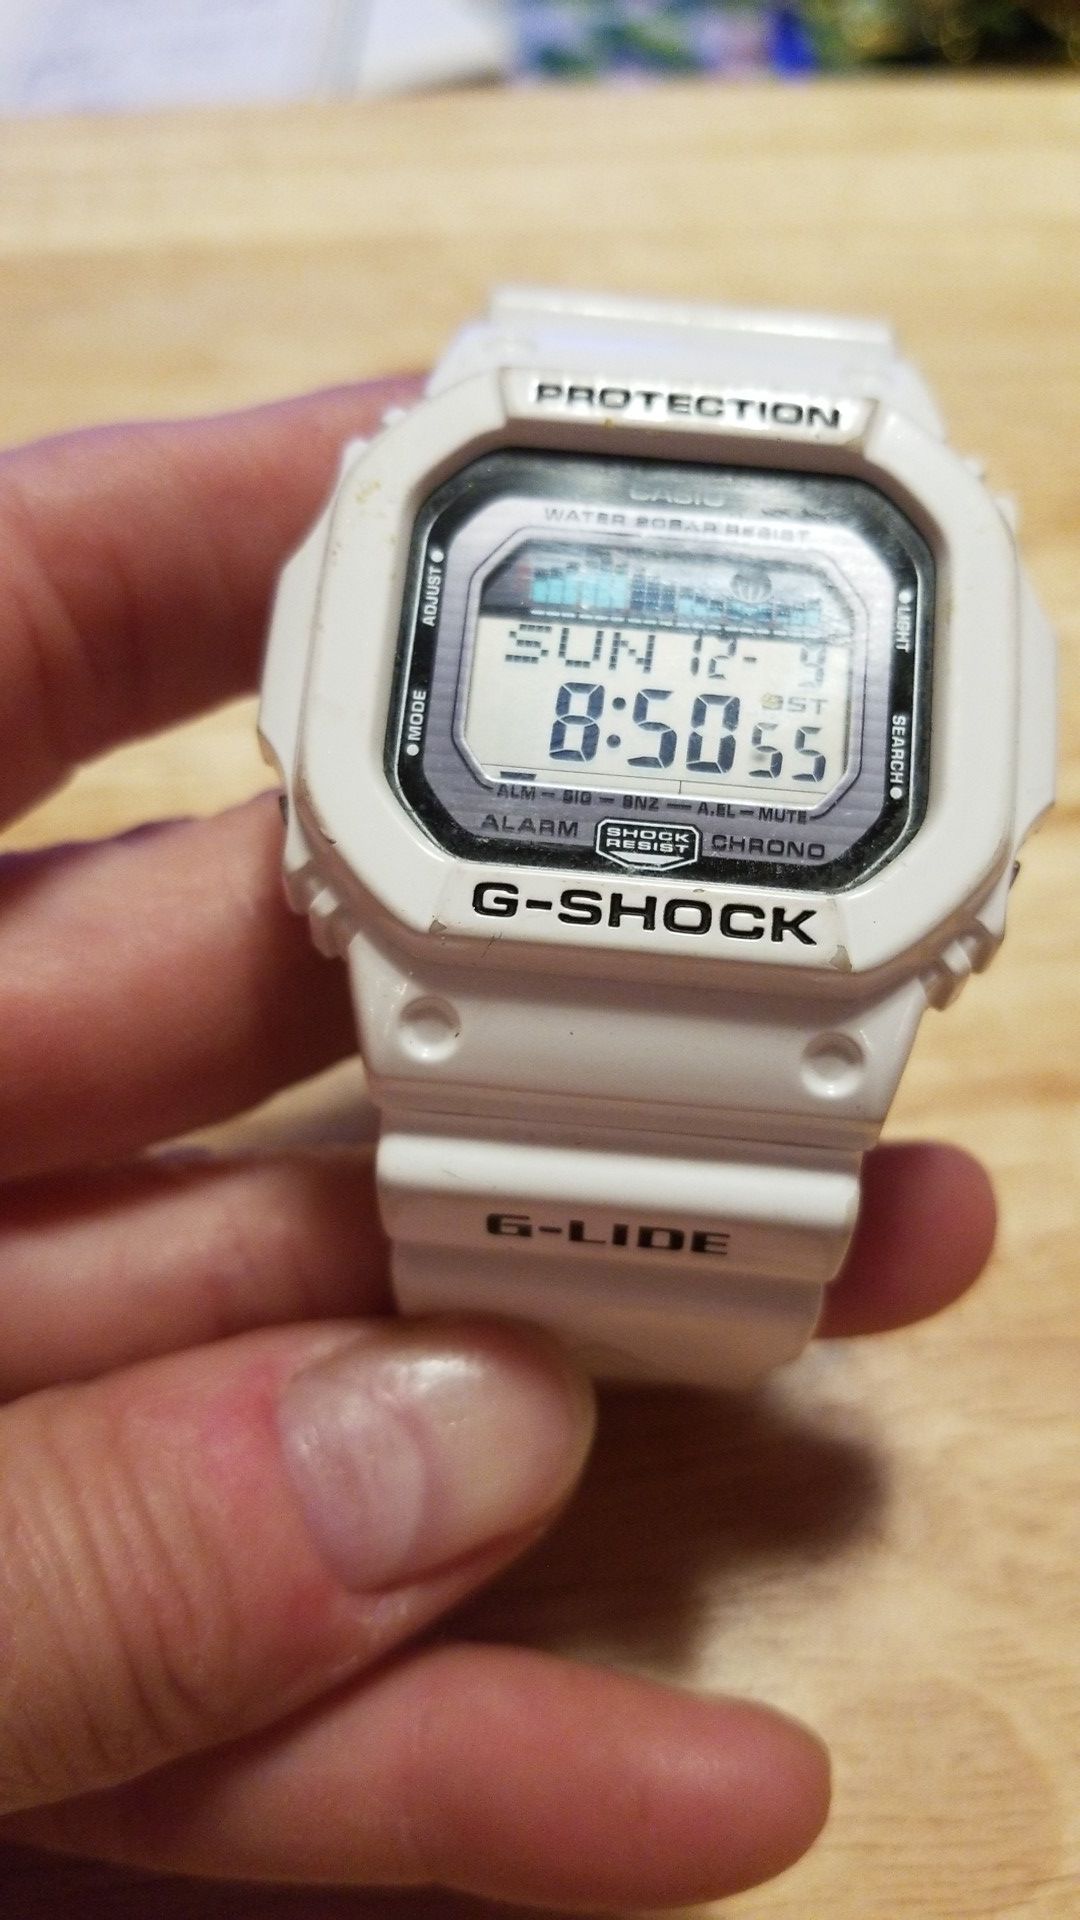 The G shock 6 lid